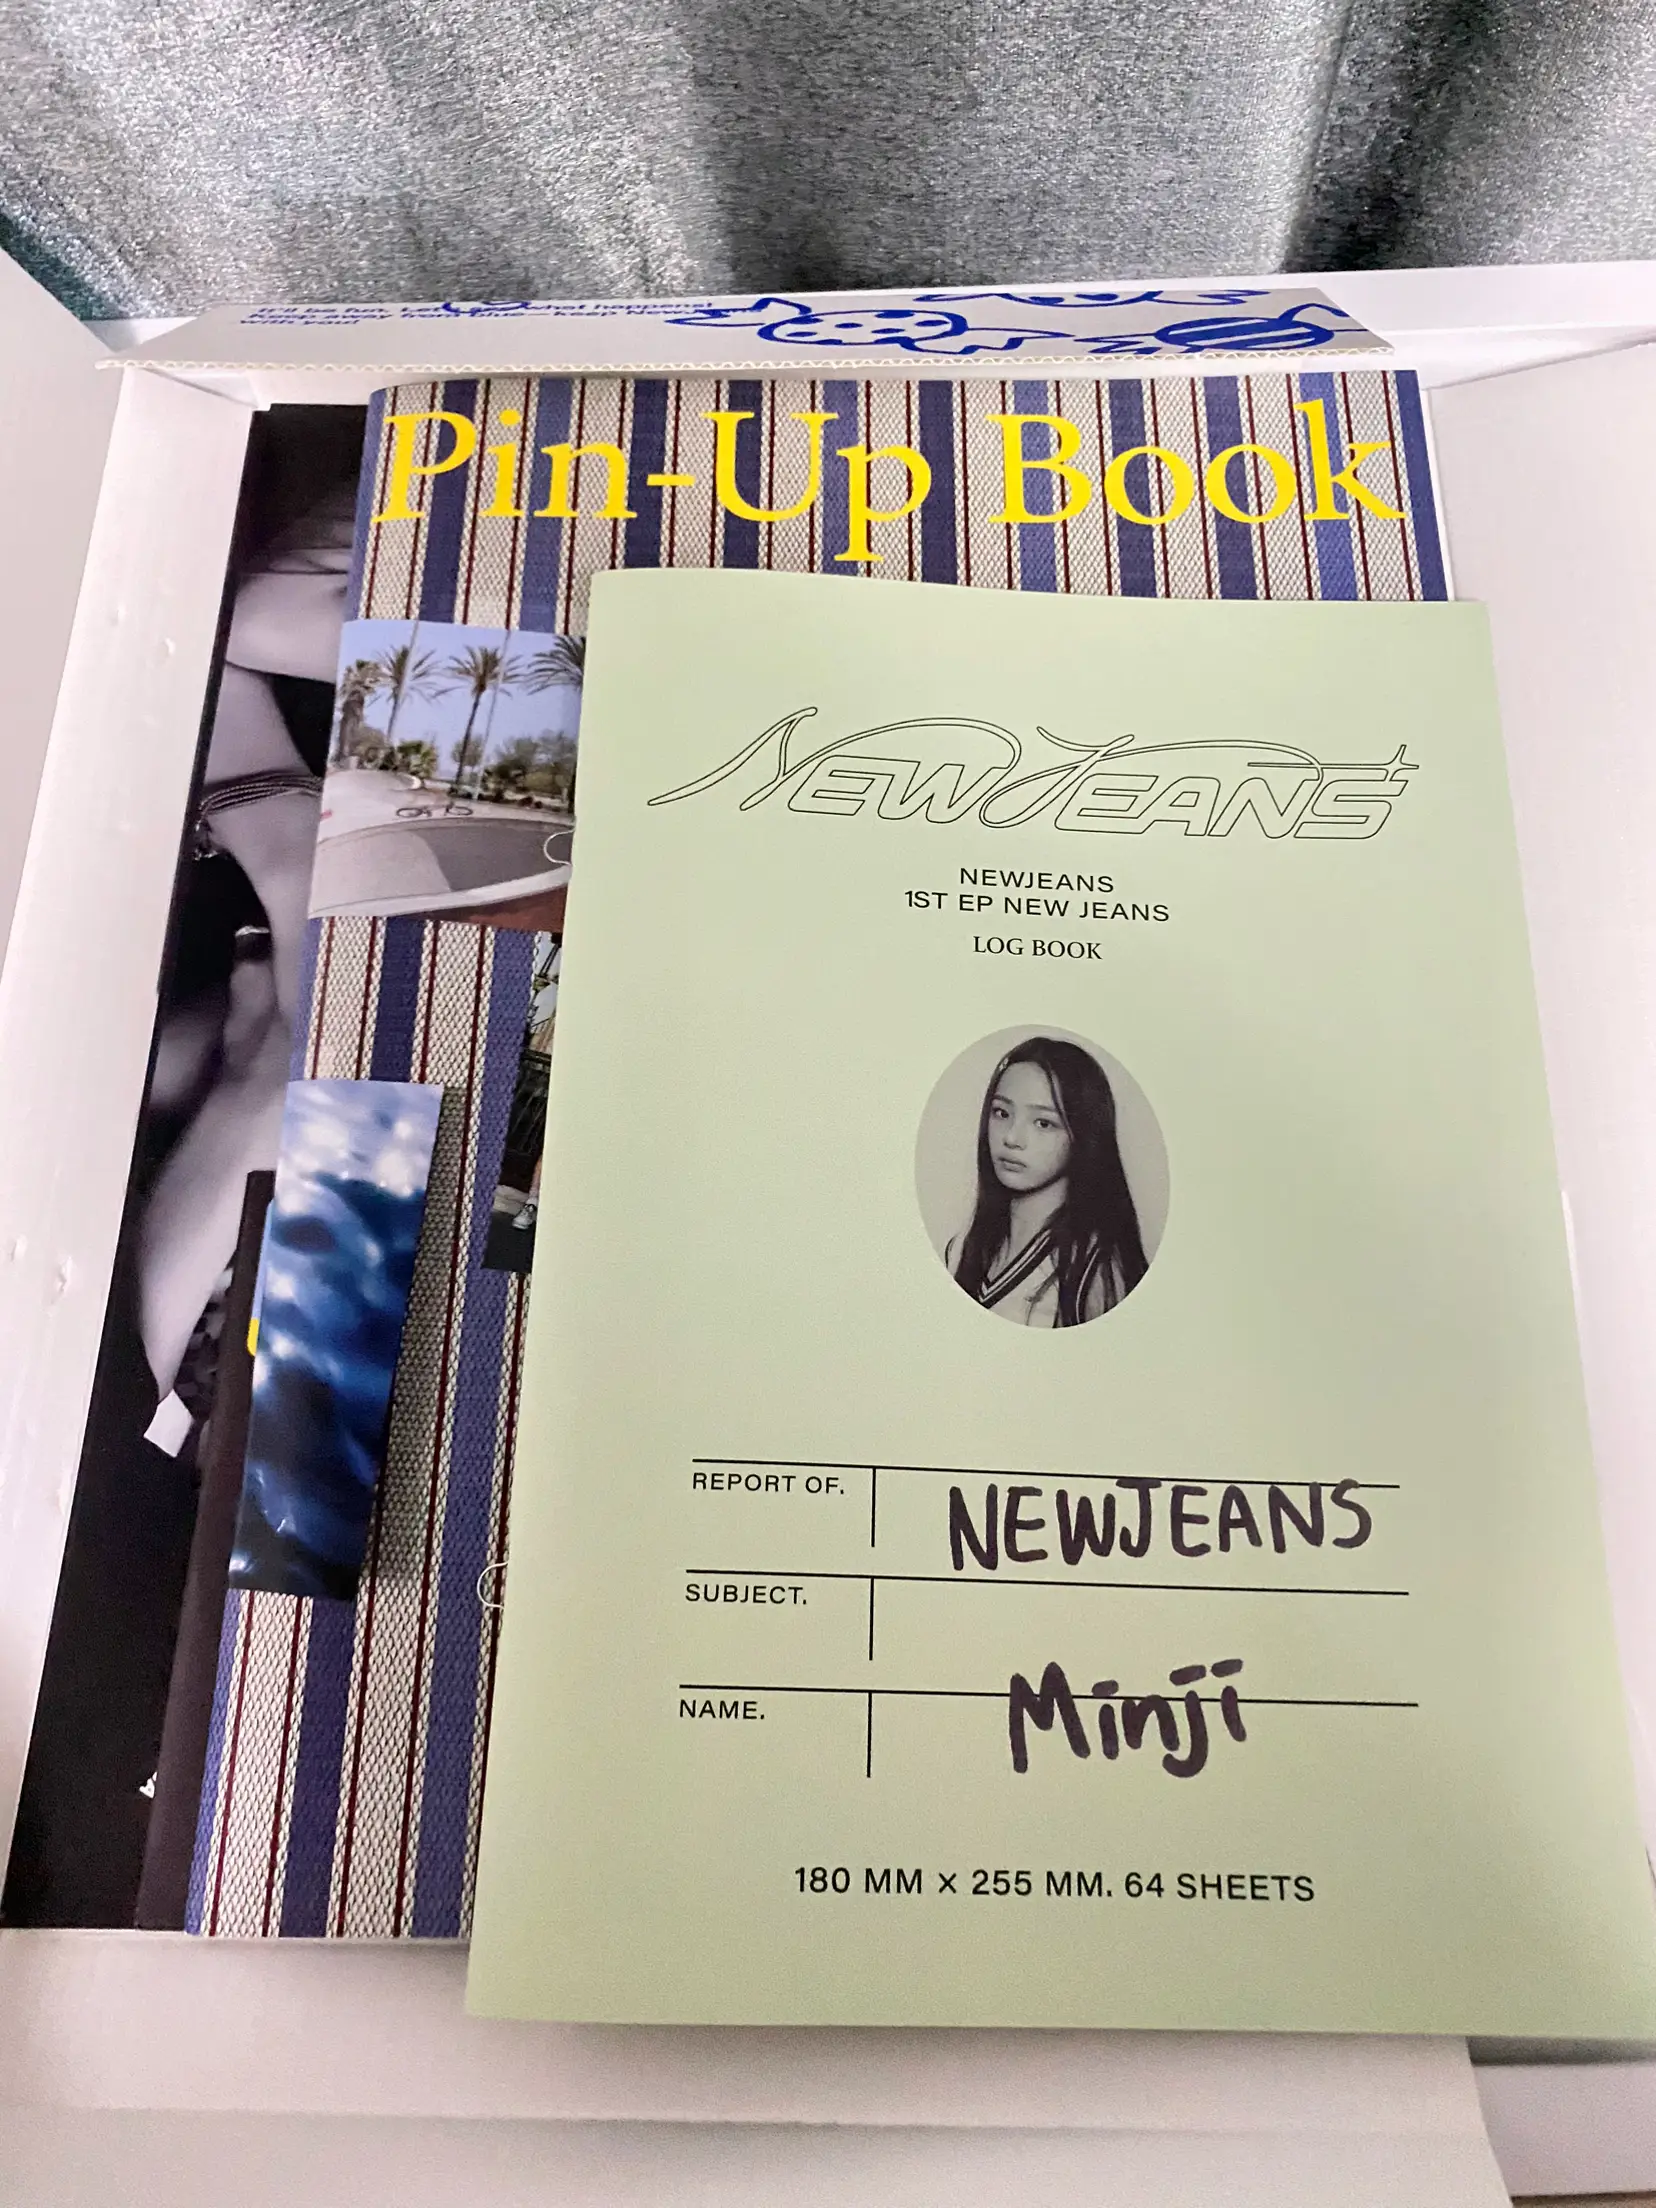 NewJeans - 1st EP [New Jeans] Bluebook ver.